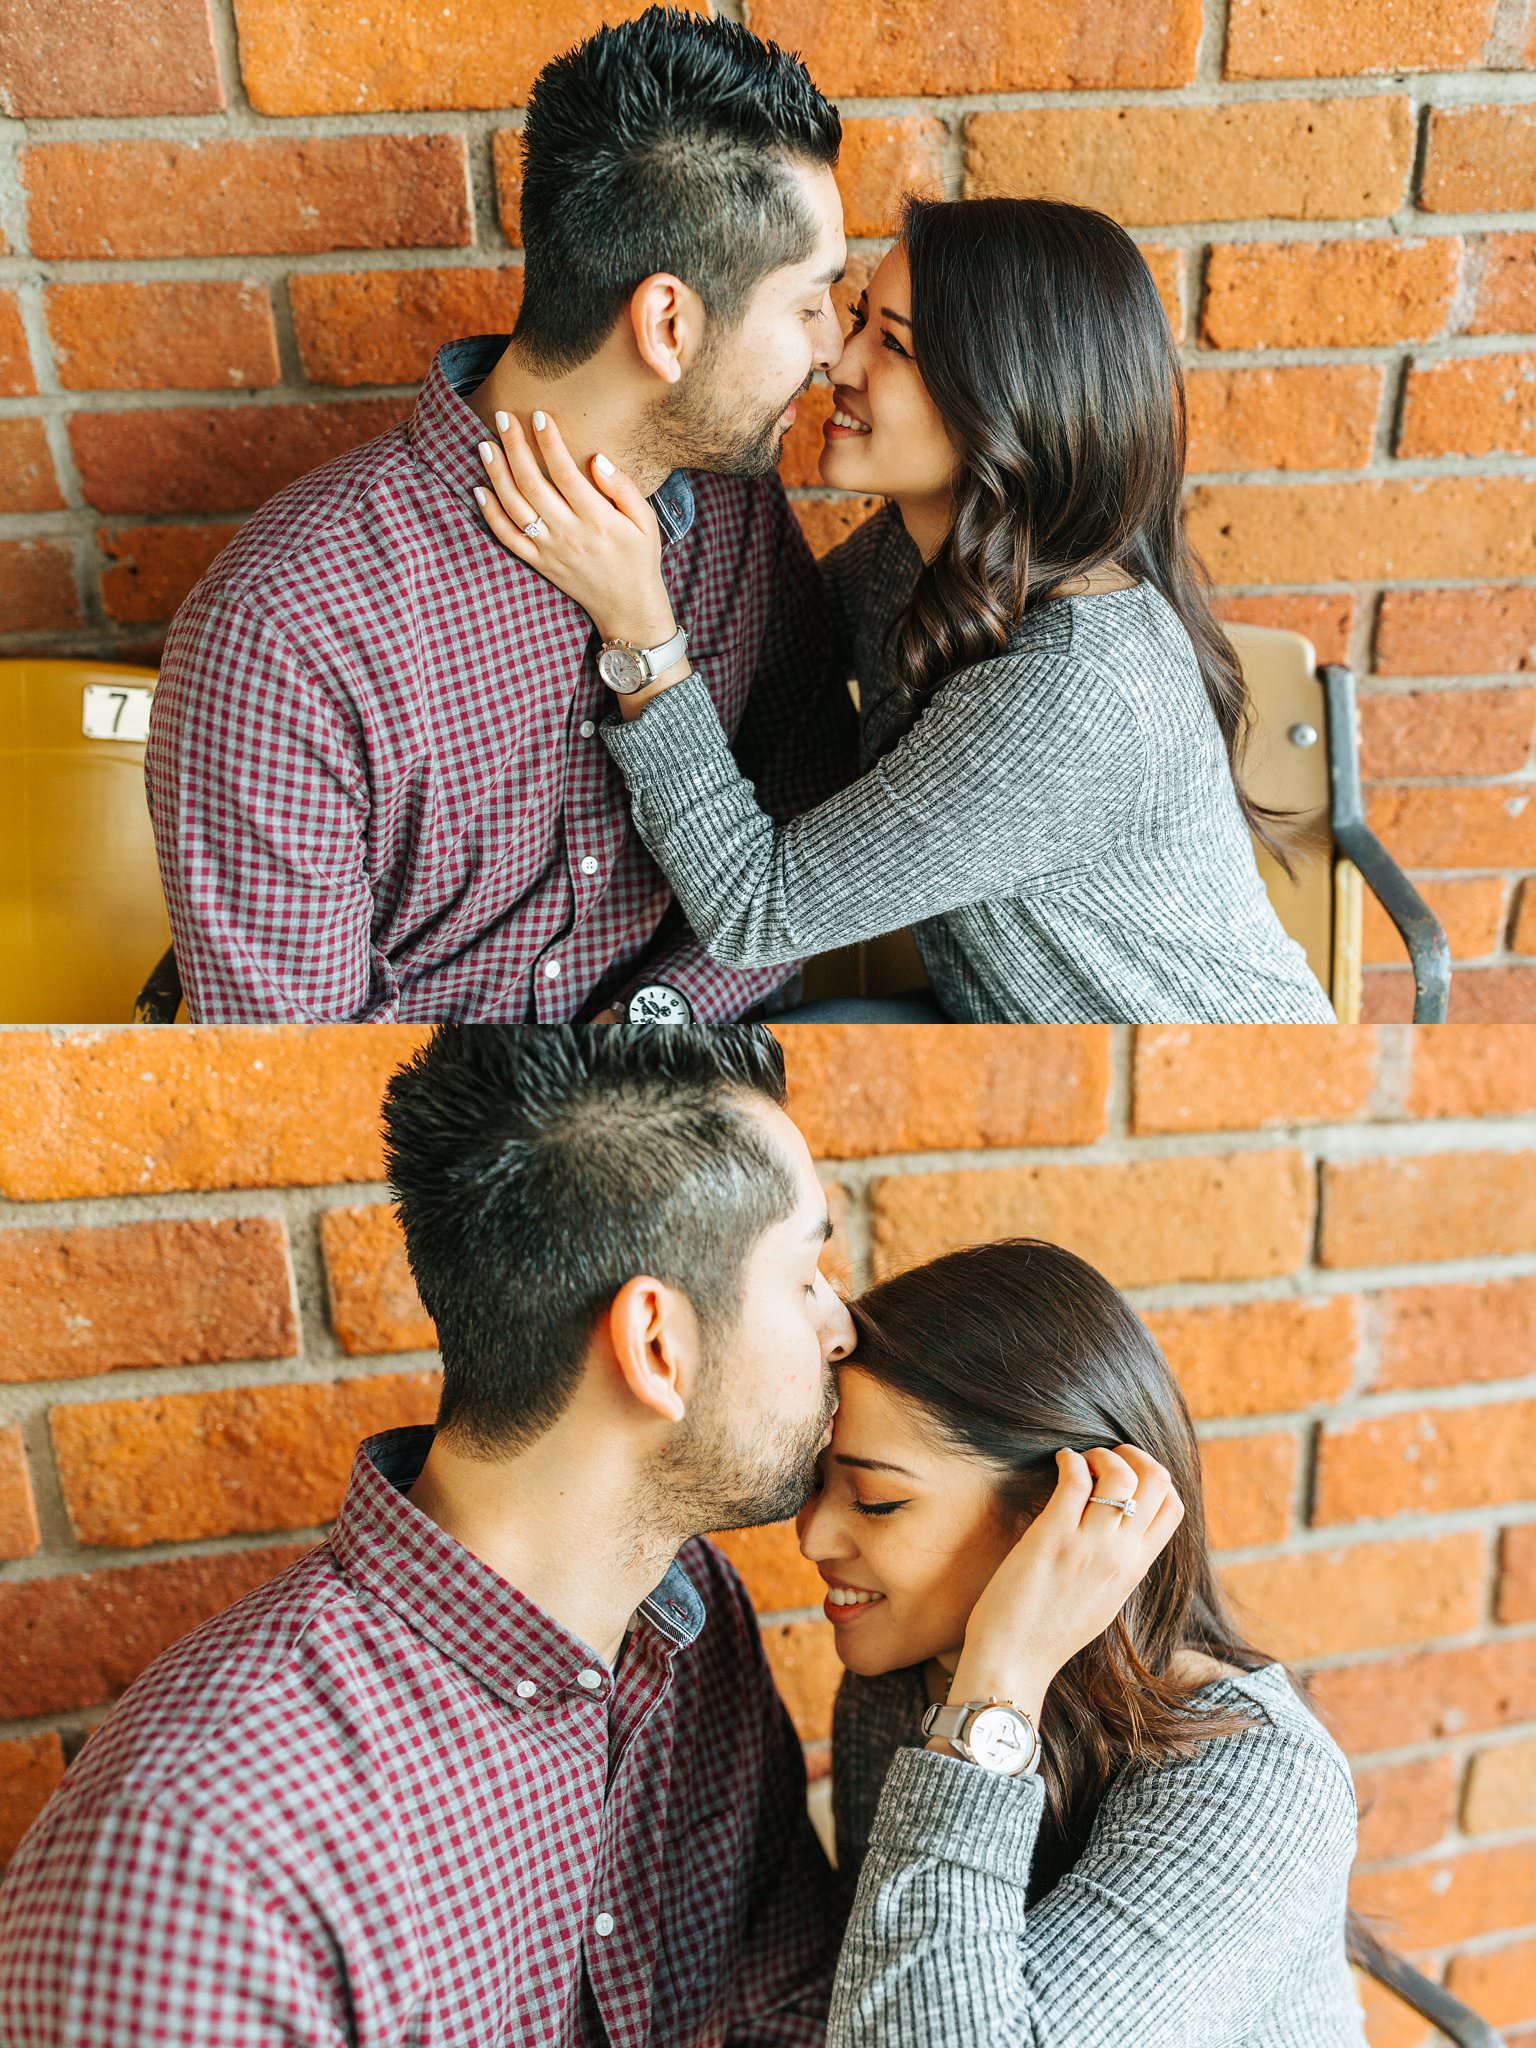 Dodger Stadium Engagement Session in Los Angeles, CA - http://brittneyhannonphotography.com